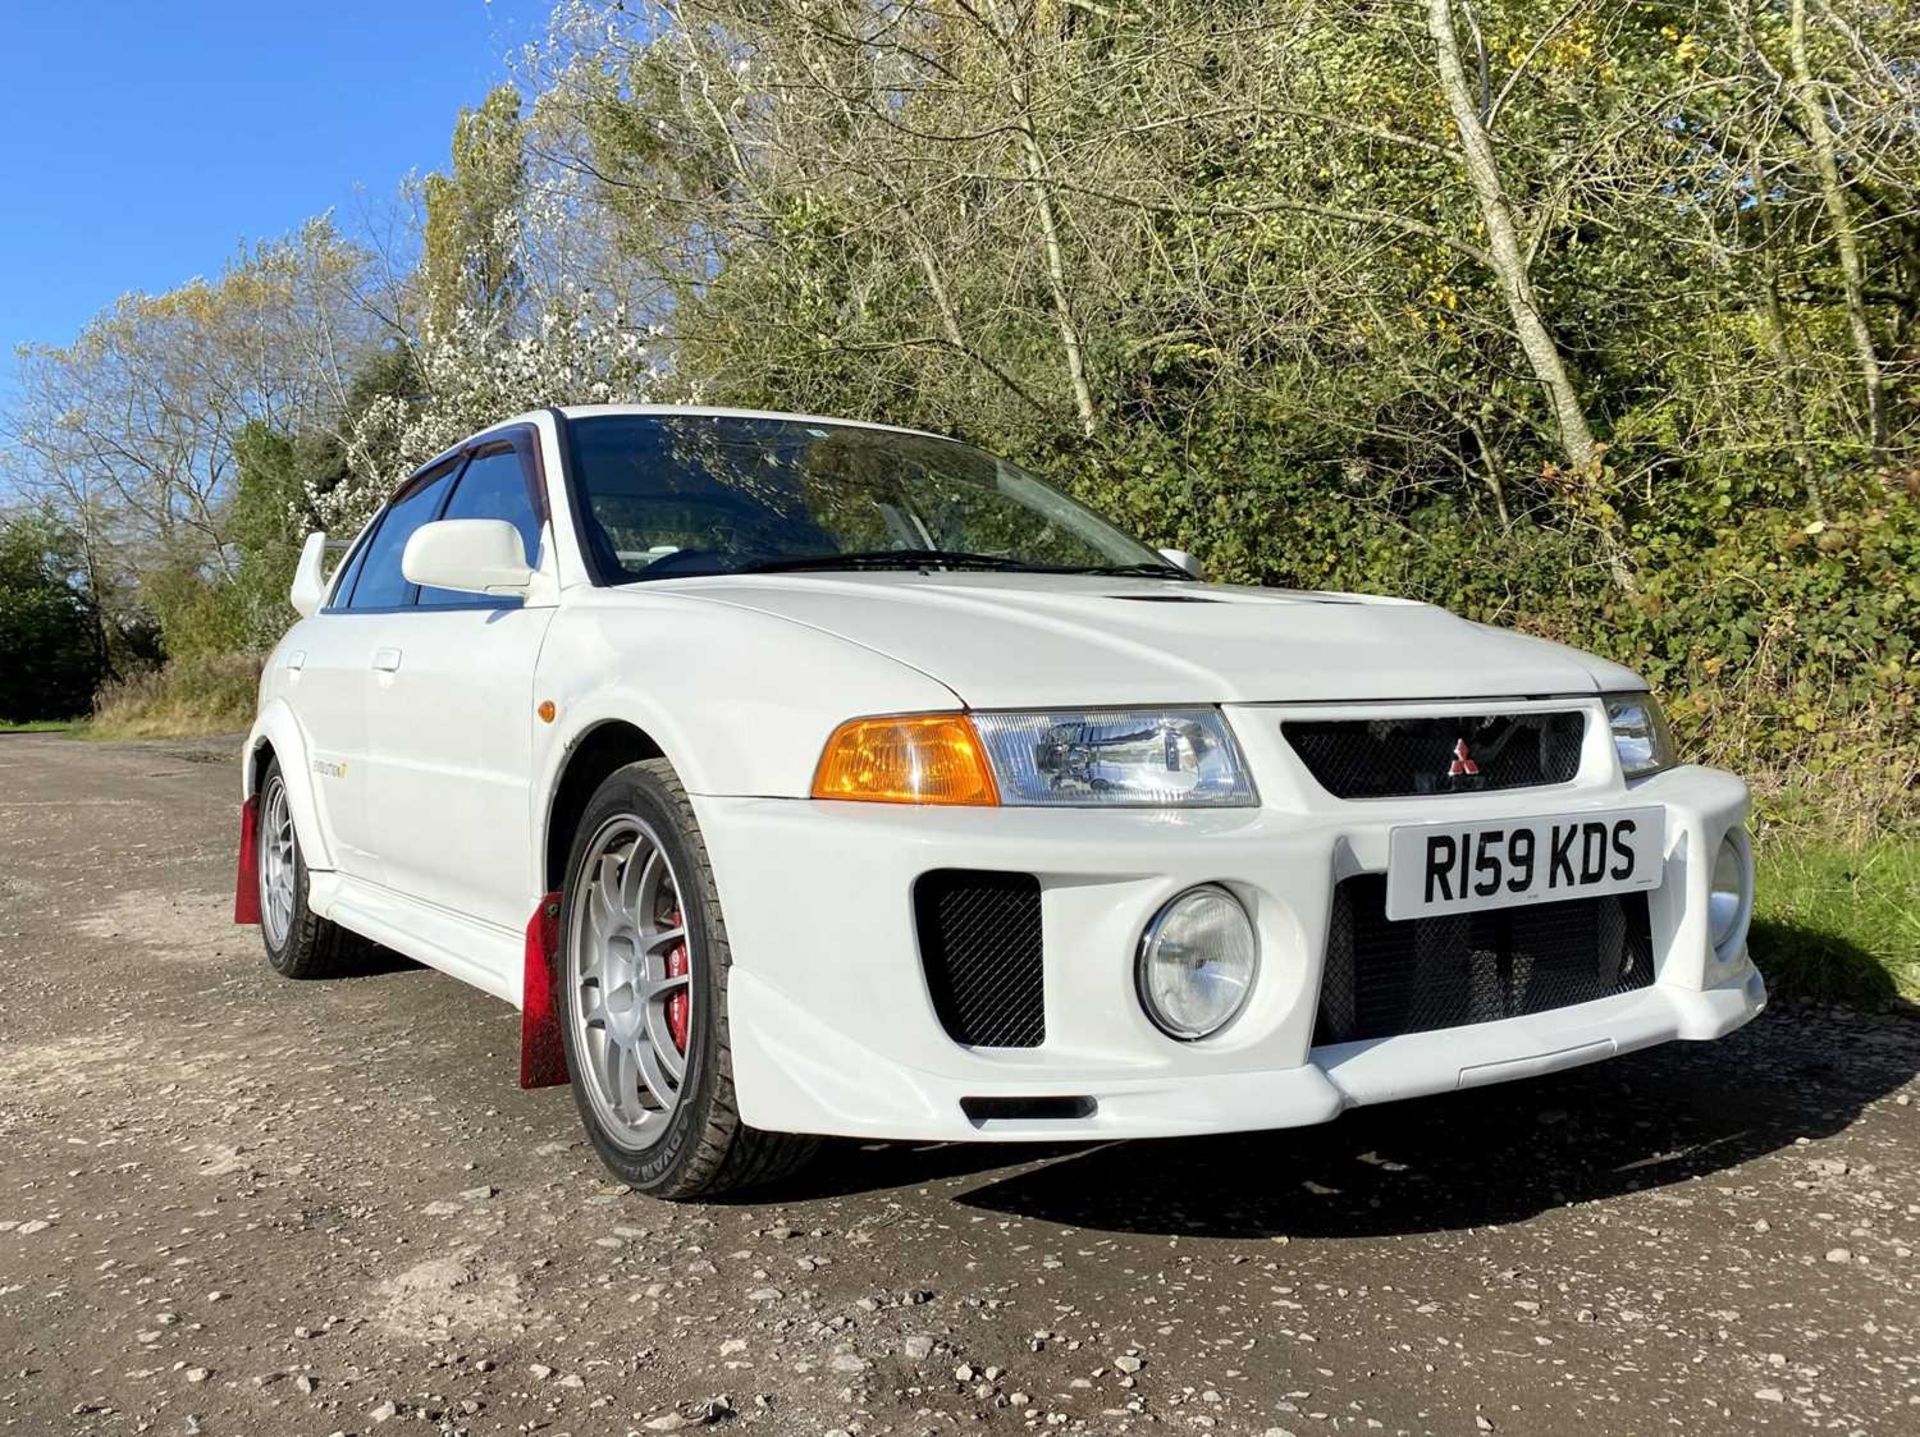 1998 Mitsubishi Lancer Evolution V GSR One UK keeper since being imported two years ago